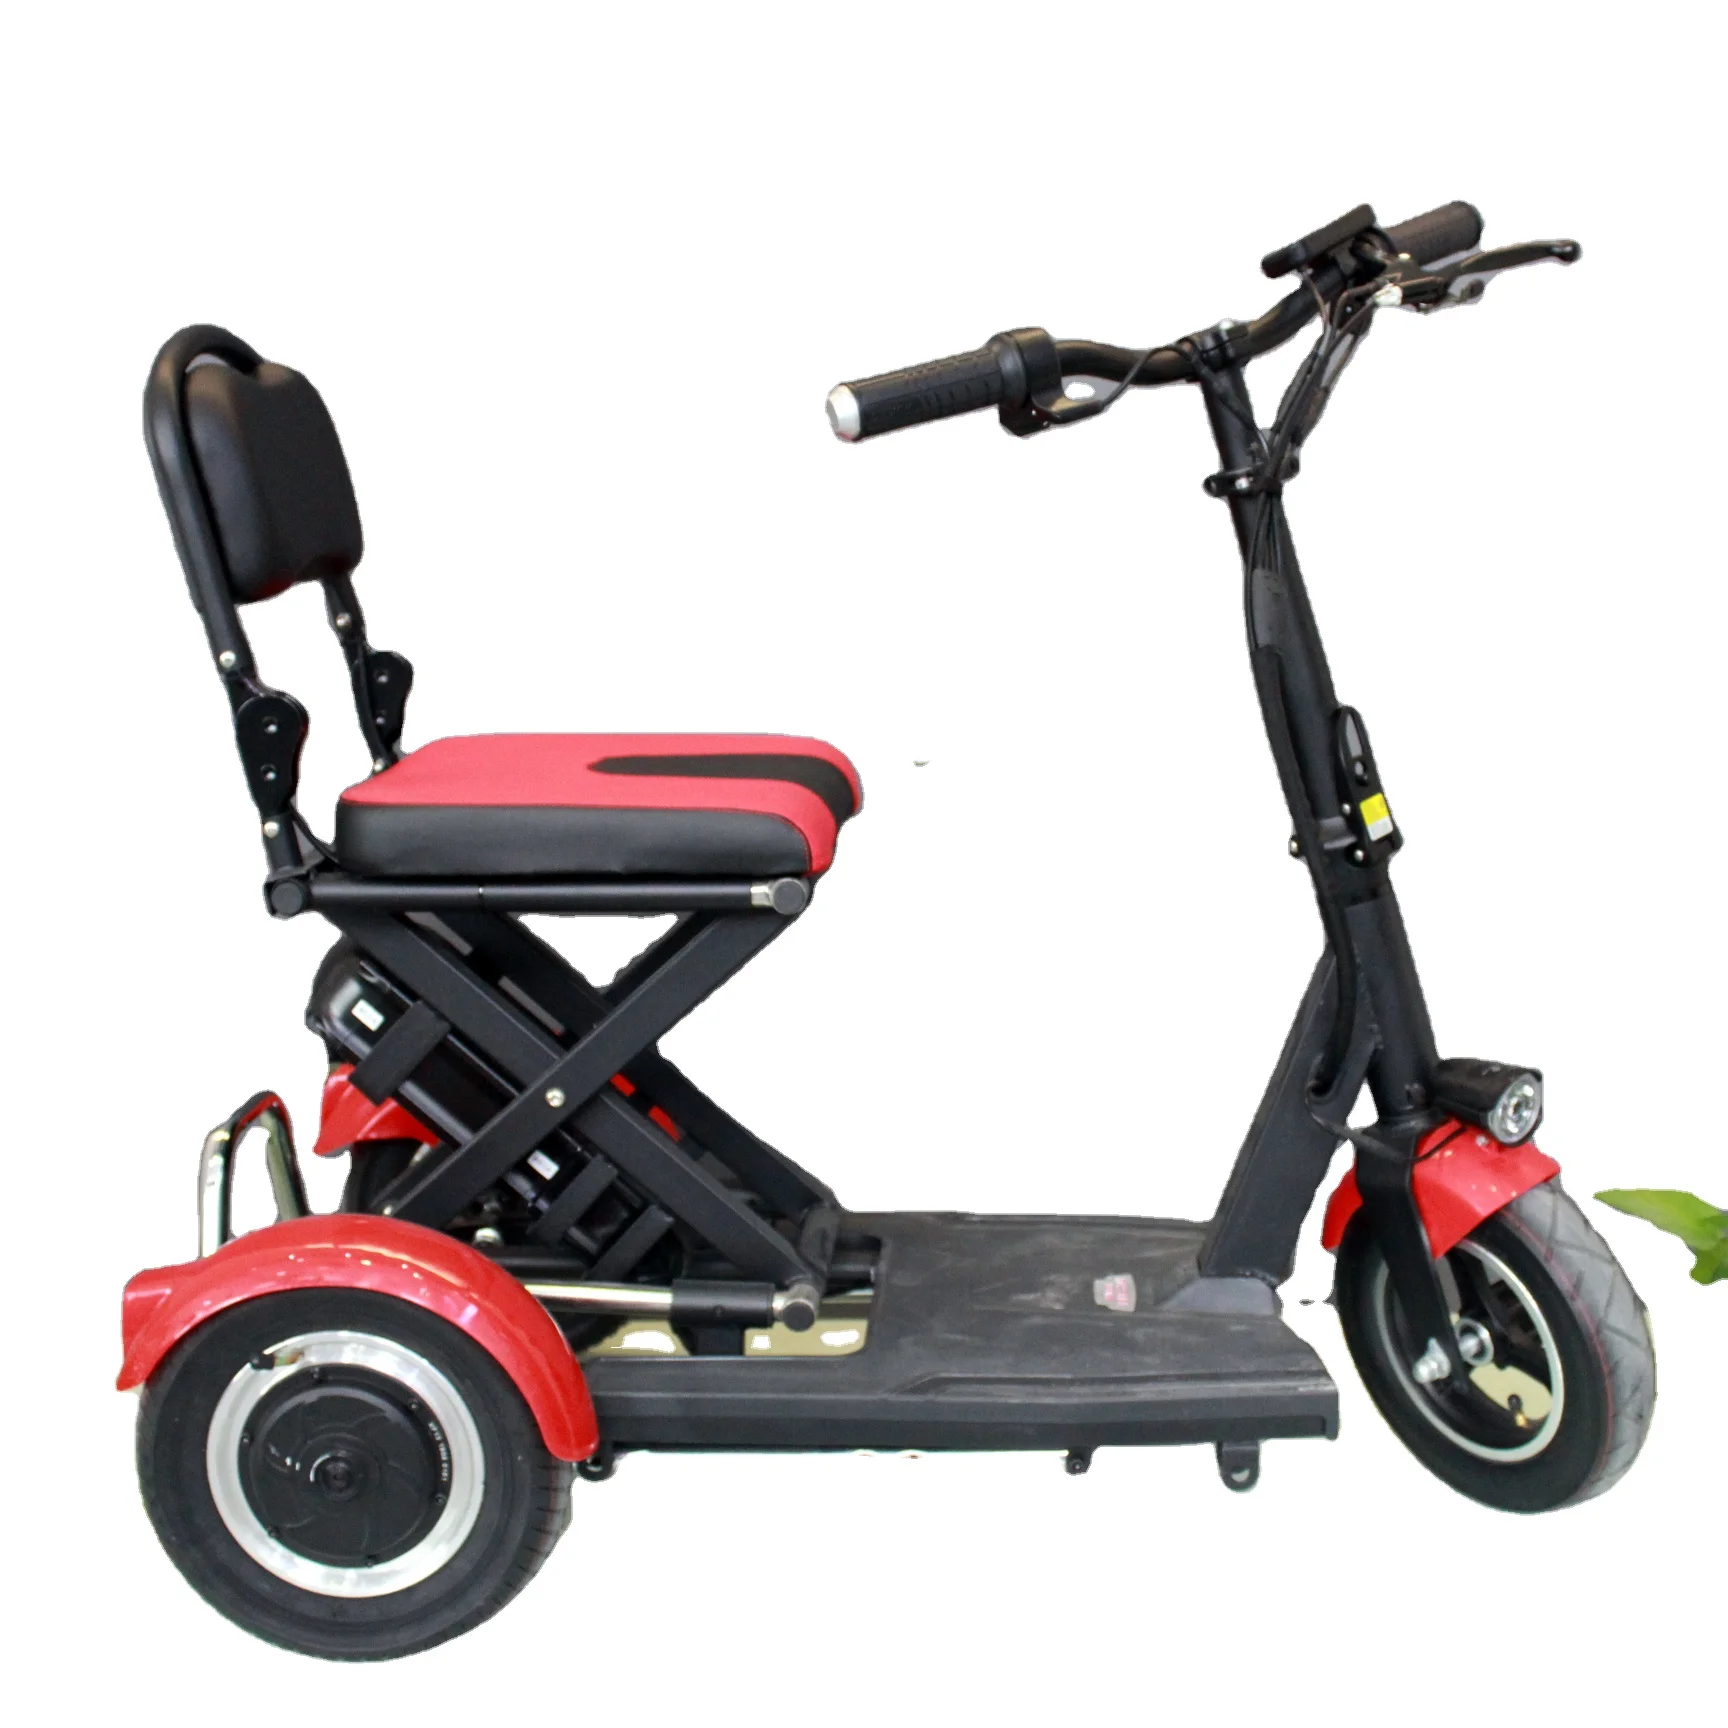 Electric Scooter Folding Type For Elderly And Disabled Handicapped Scooters 36v/48v 10Ah Lithium Battery Motor Scooter custom engwe t14 folding electric bicycle 14 inch tire 250w brushless motor 48v 10ah battery 25km h max speed white